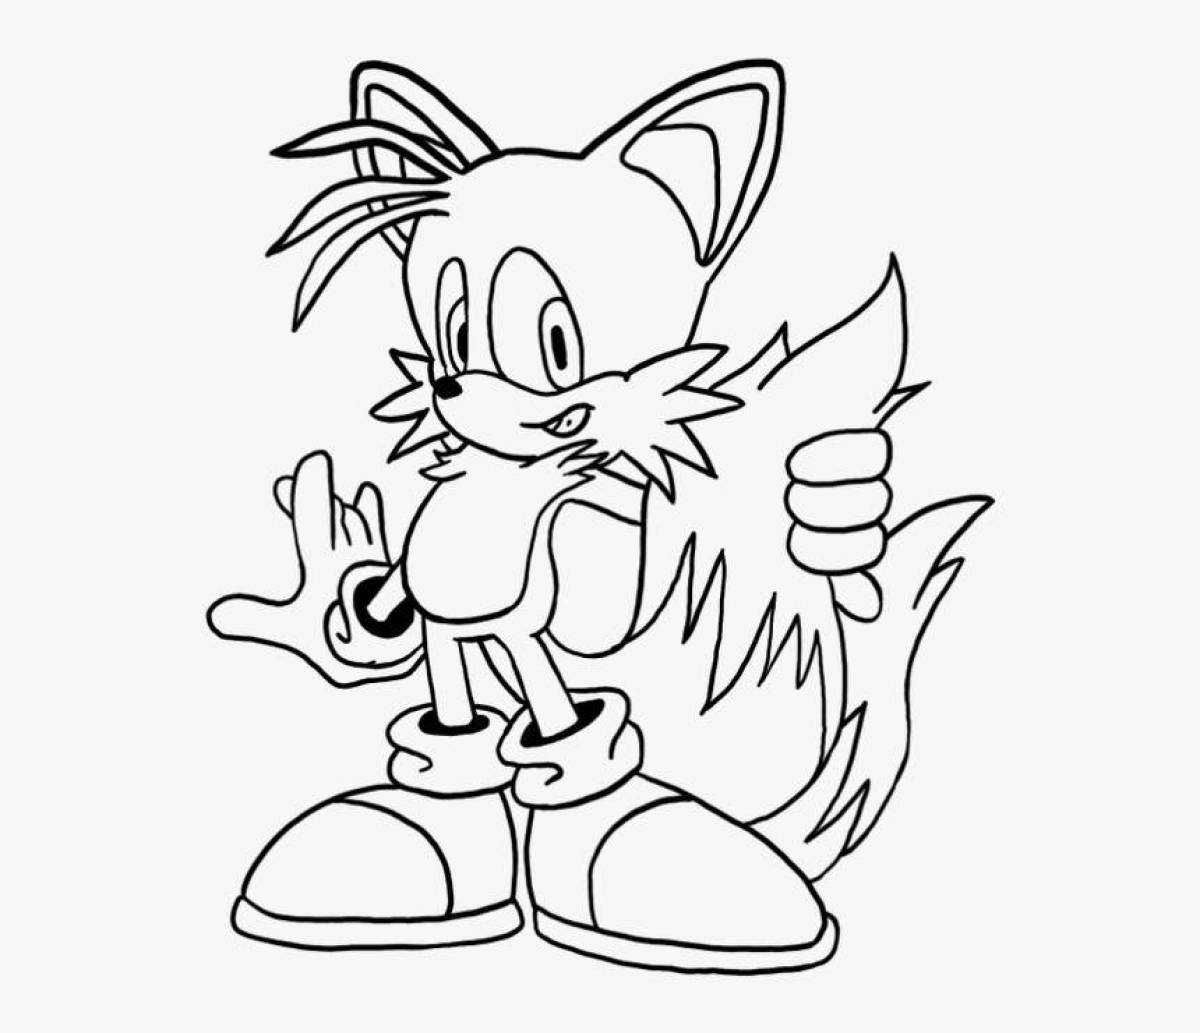 Colorful sonic x coloring